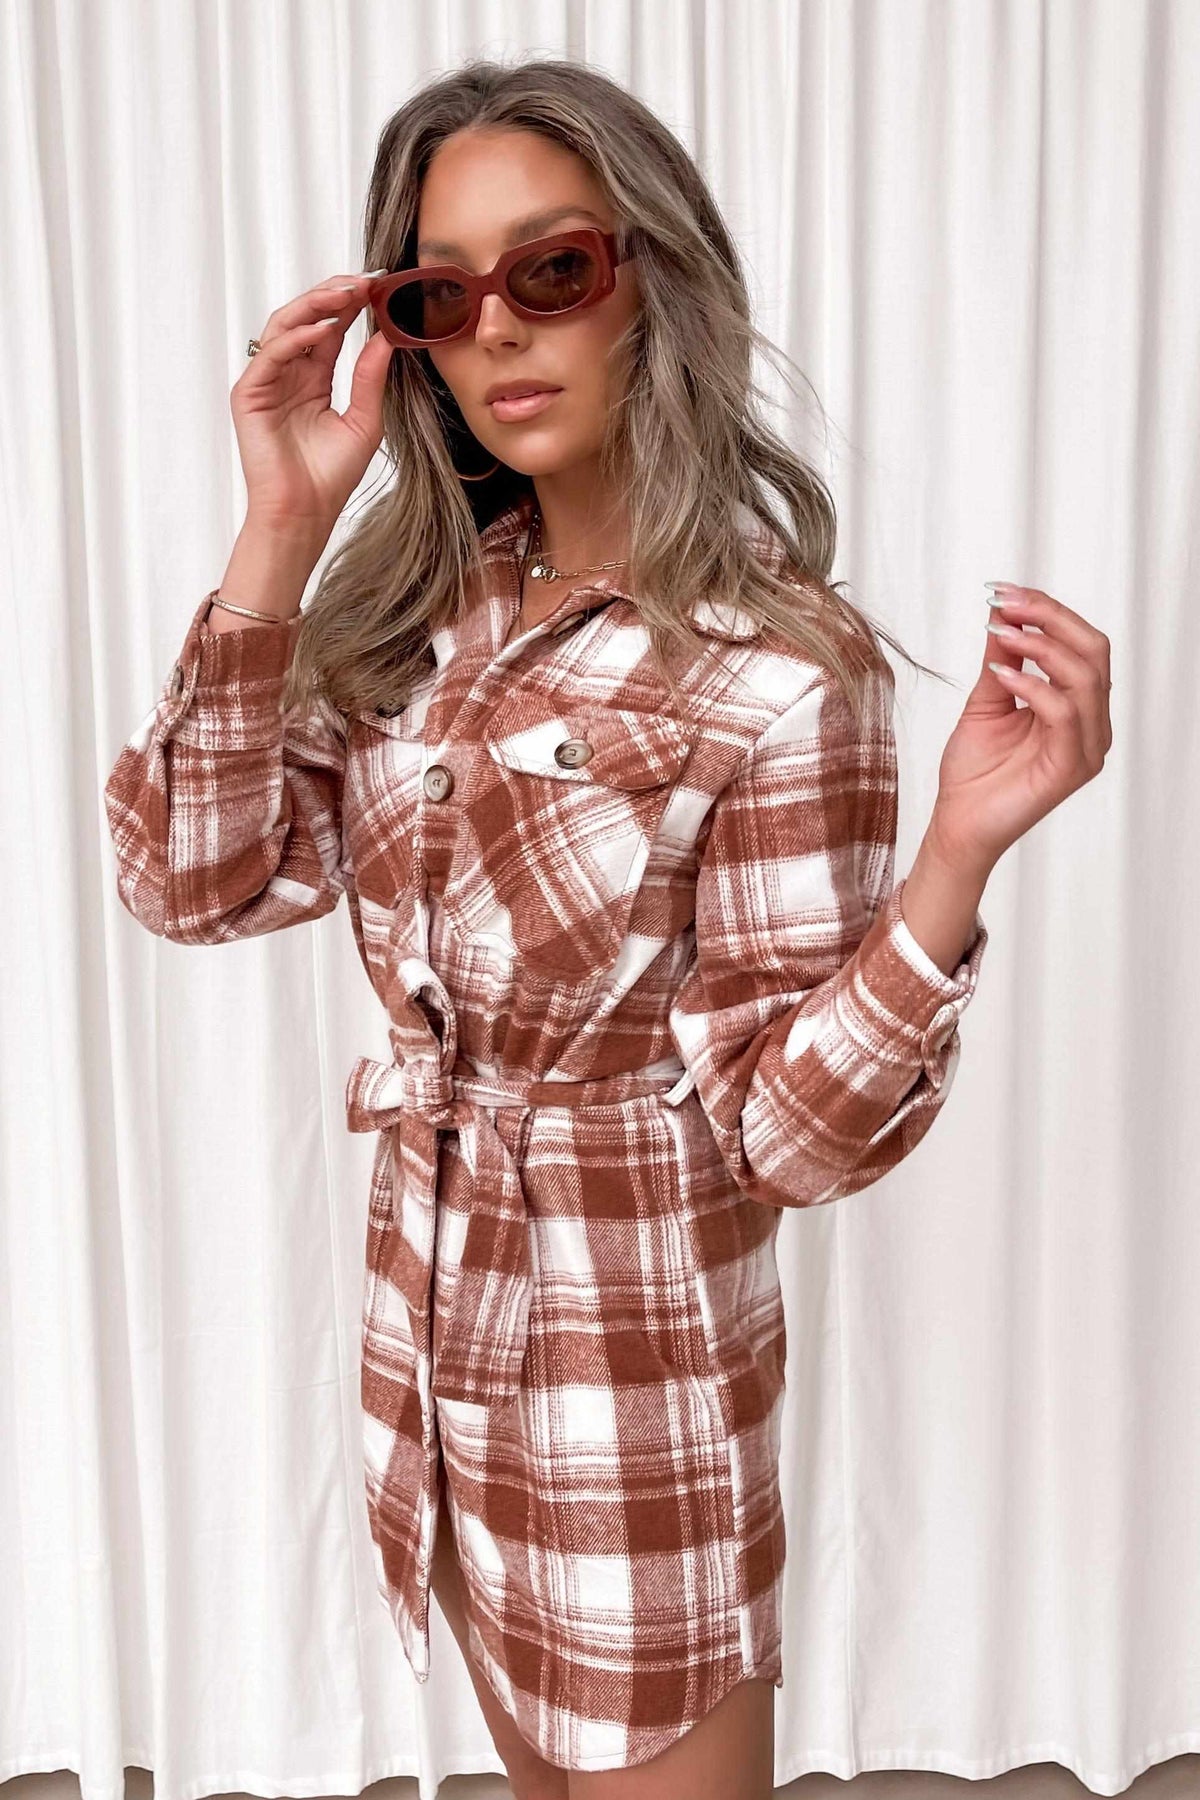 Sorbet Jacket, BUTTON UP, CHECK, DRESS, JACKETS, LONG SLEEVE, POLYESTER, RED, Sale, WAIST TIE, Sorbet Jacket only $76.00 @ MISHKAH ONLINE FASHION BOUTIQUE, Shop The Latest Women&#39;s Dresses - Our New Sorbet Jacket is only $76.00, @ MISHKAH ONLINE FASHION BOUTIQUE-MISHKAH